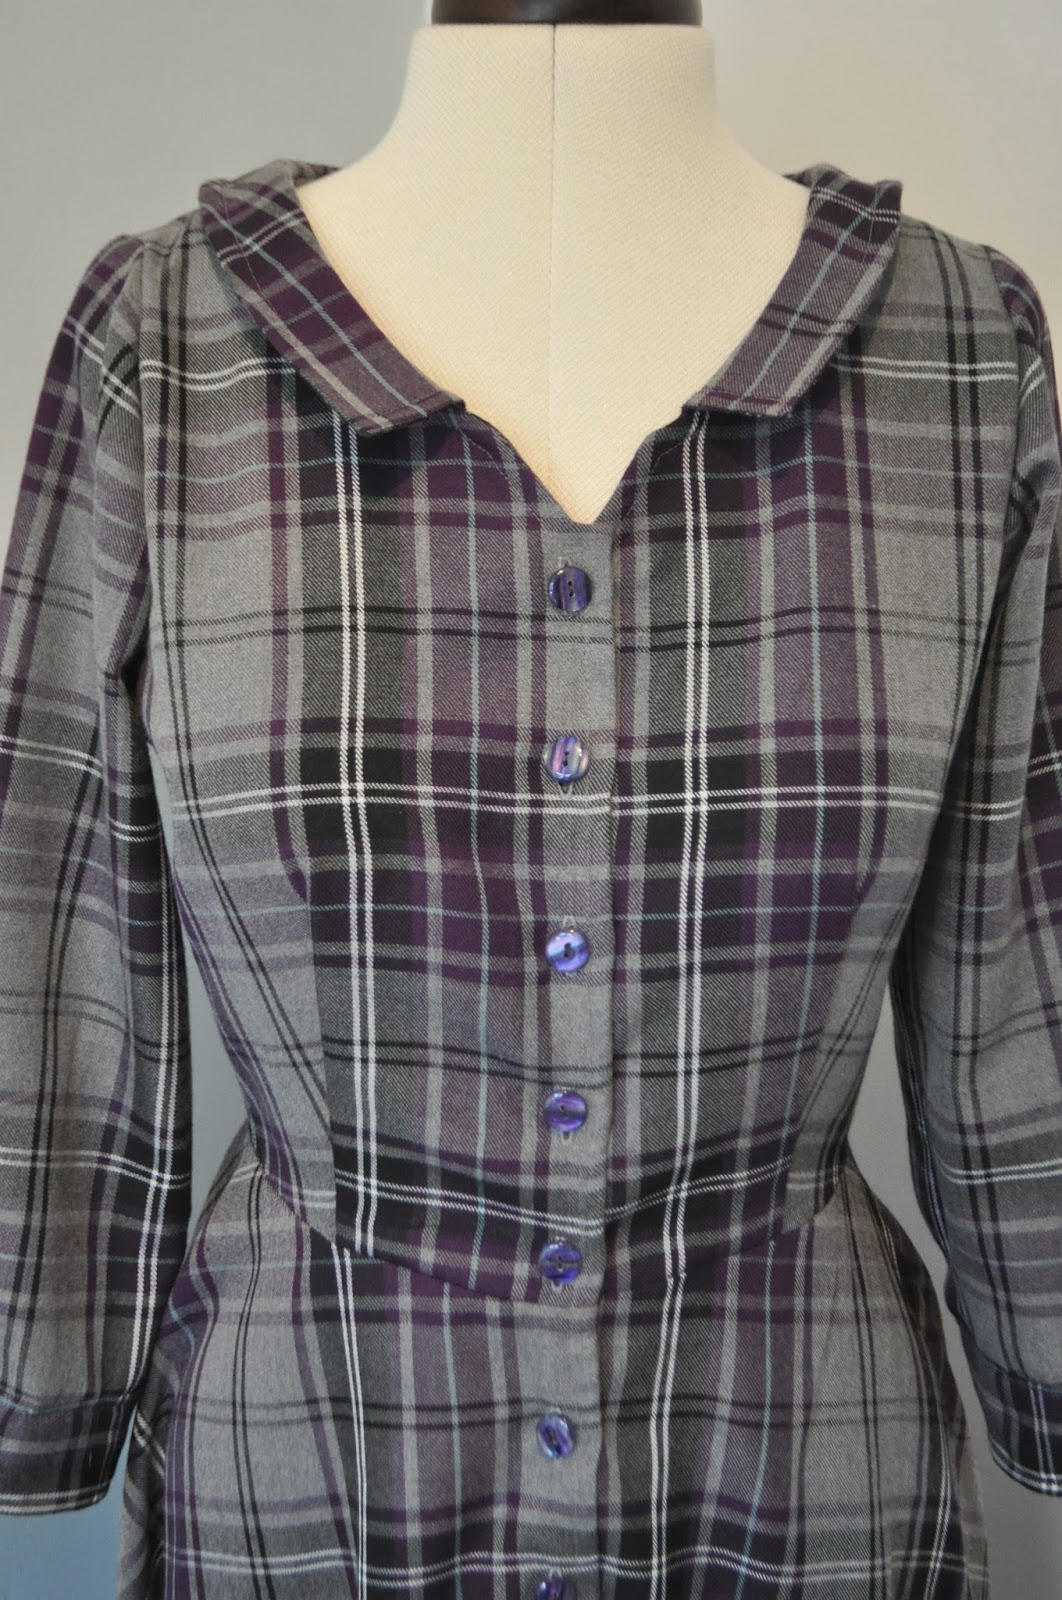 mags creative meanderings: Plaid Hawthorn and a give-away